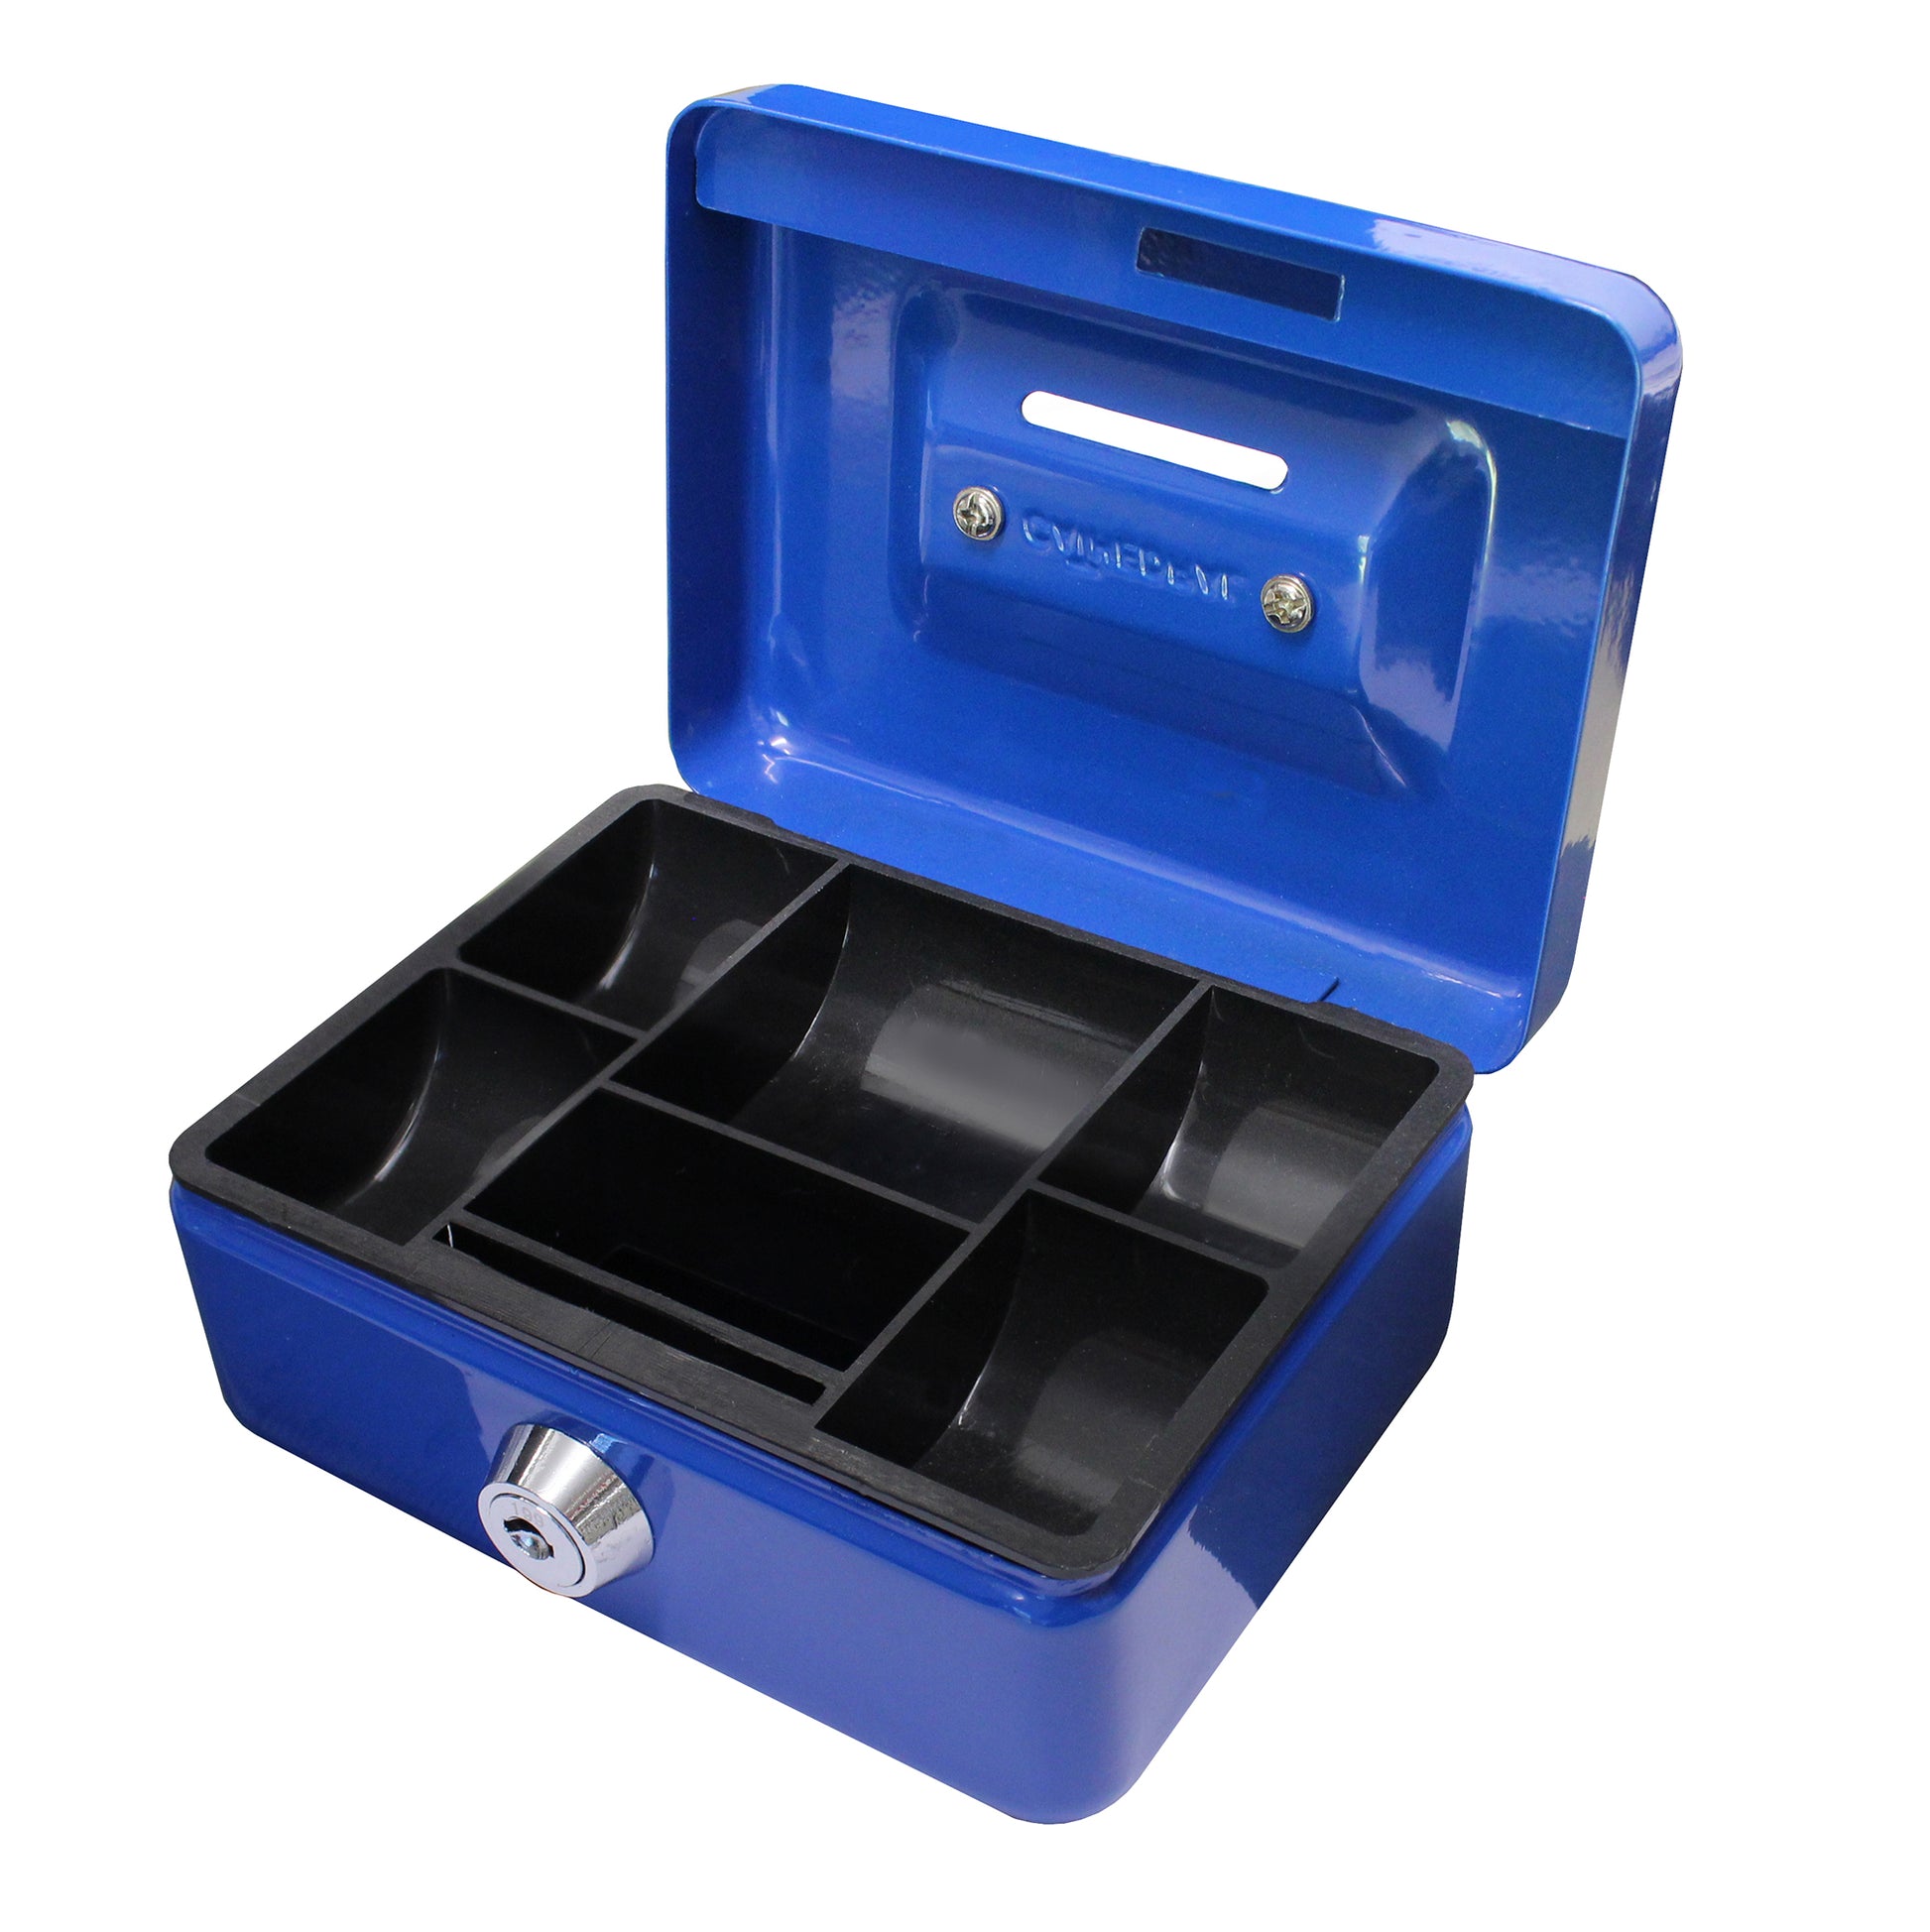 An open 4-inch key lockable blue cash box with a coin slot visible in the lid and a lift-out black 5-compartment tray, designed for organizing and securing coins and cash